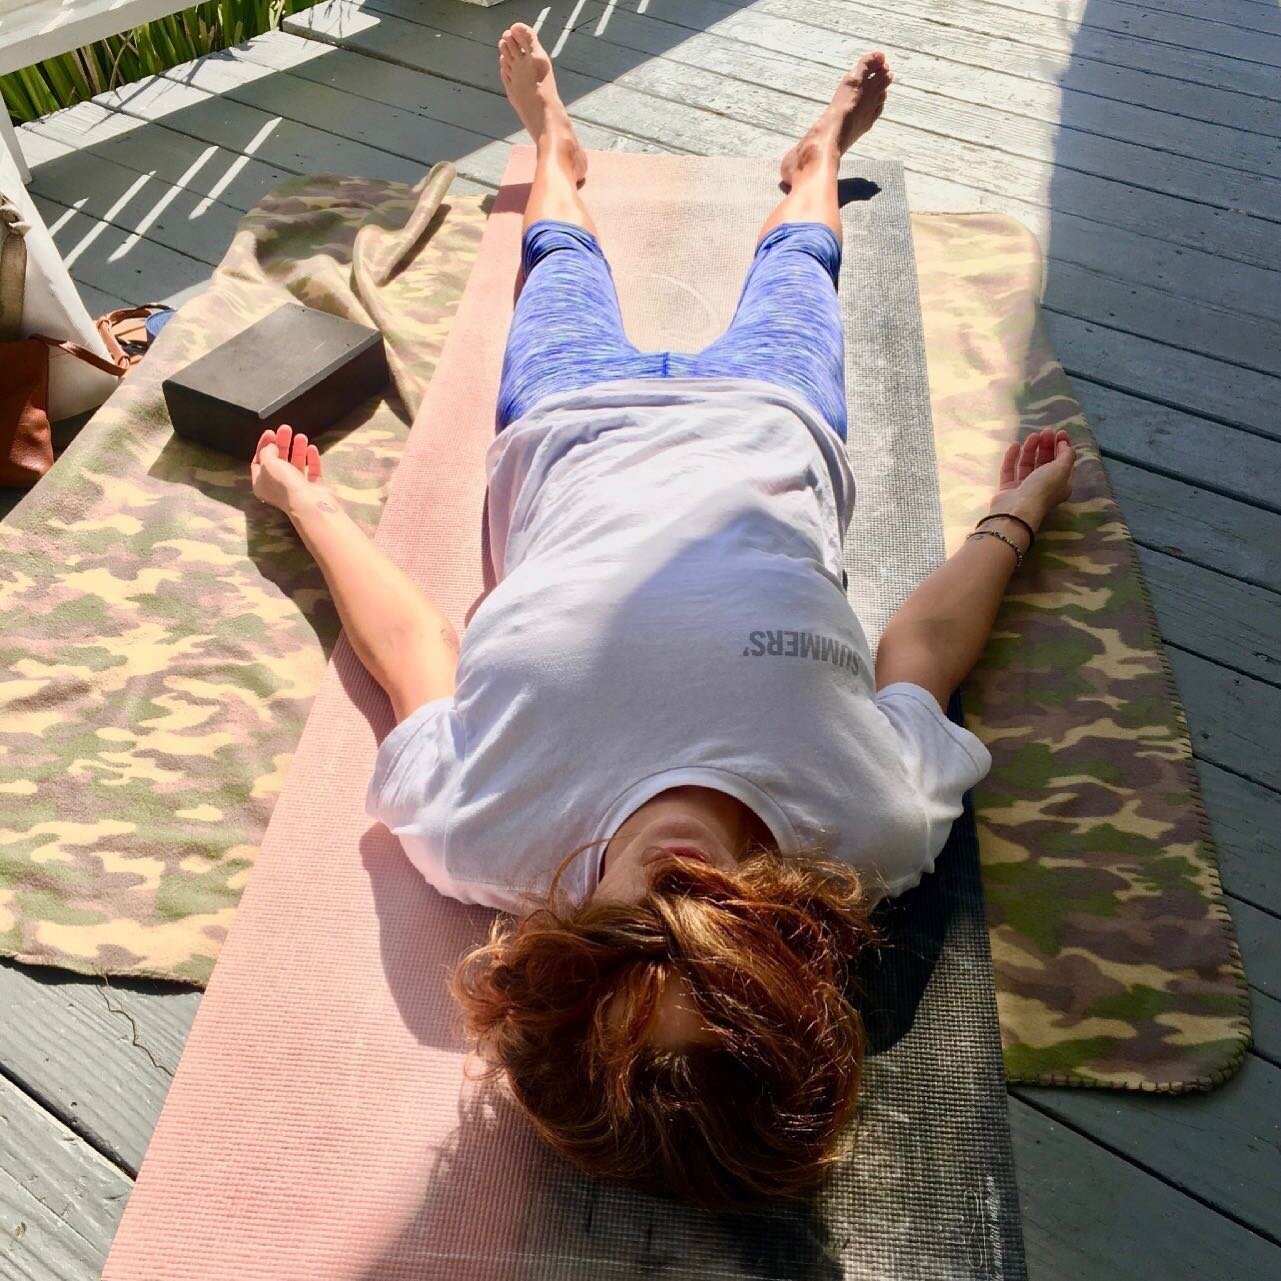 Forget your sunglasses? No problem ... try this natural styling :) by our creative student as we eased into a lovely Savasana - what a magical sunny day ☀️

✨✌🏼
.
.
.
.
.
#outdooryogasantacruz #santacruzhair #outdooryogapractice #santacruzliving #sa